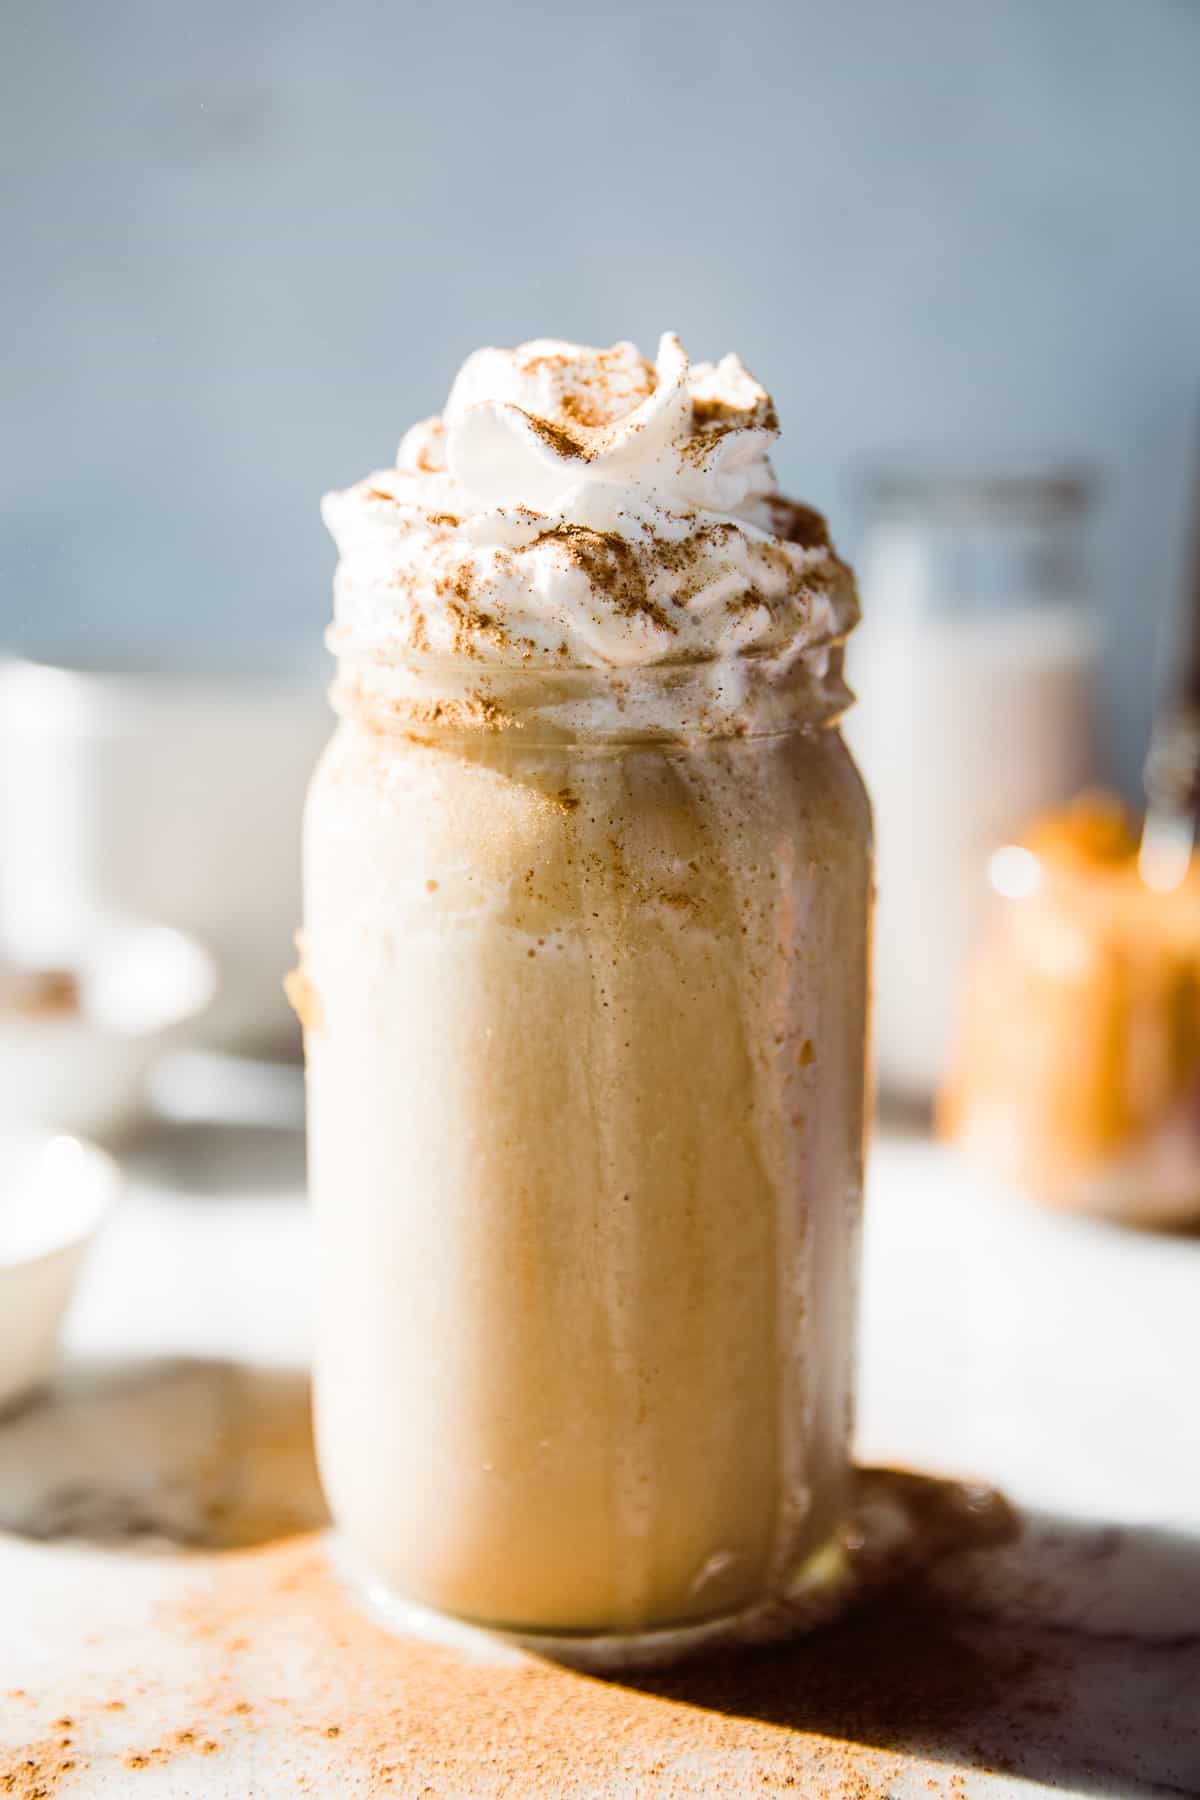 Large glass jar of orange pumpkin smoothie with whip cream and cinnamon topping.